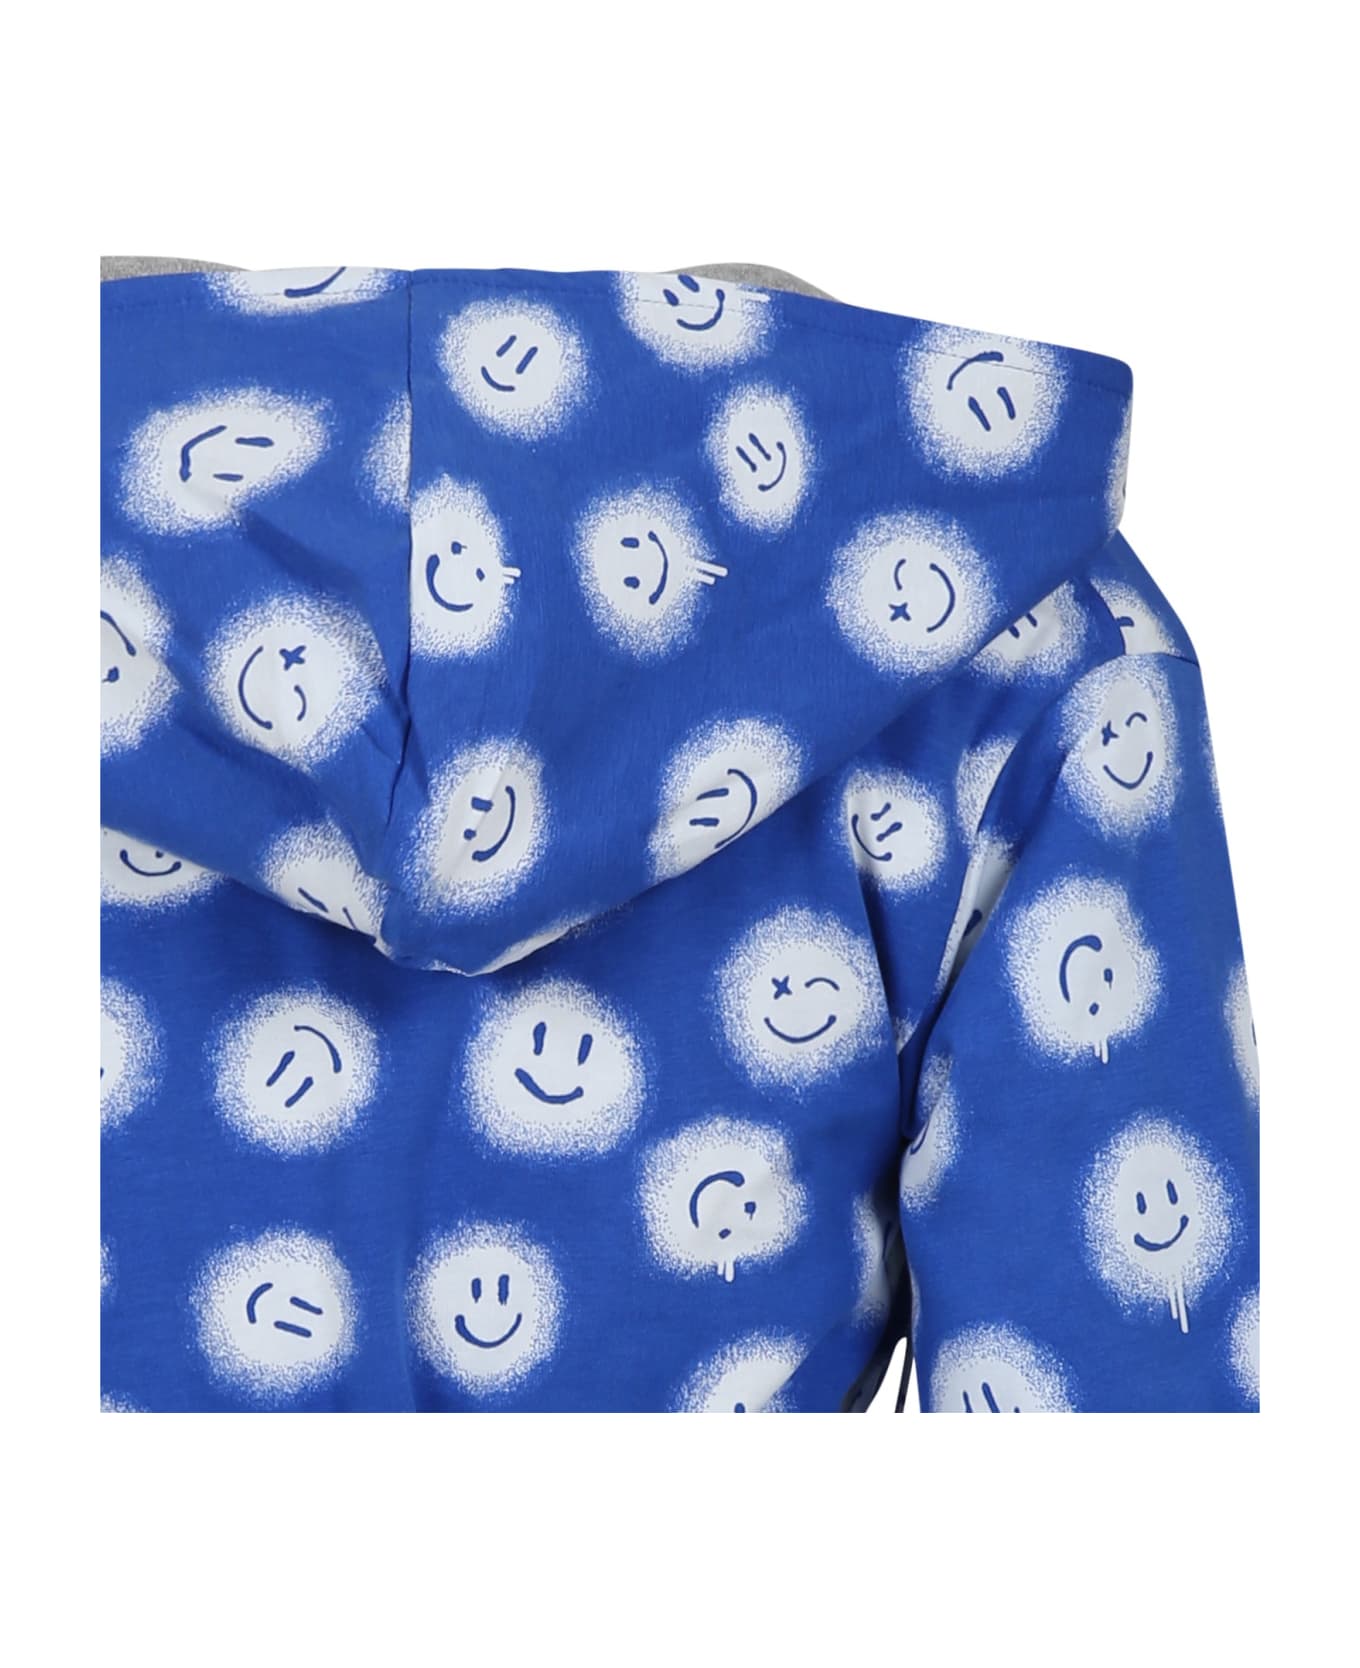 Molo Blue Dressing Gown For Kids With Smiley - Blue ジャンプスーツ